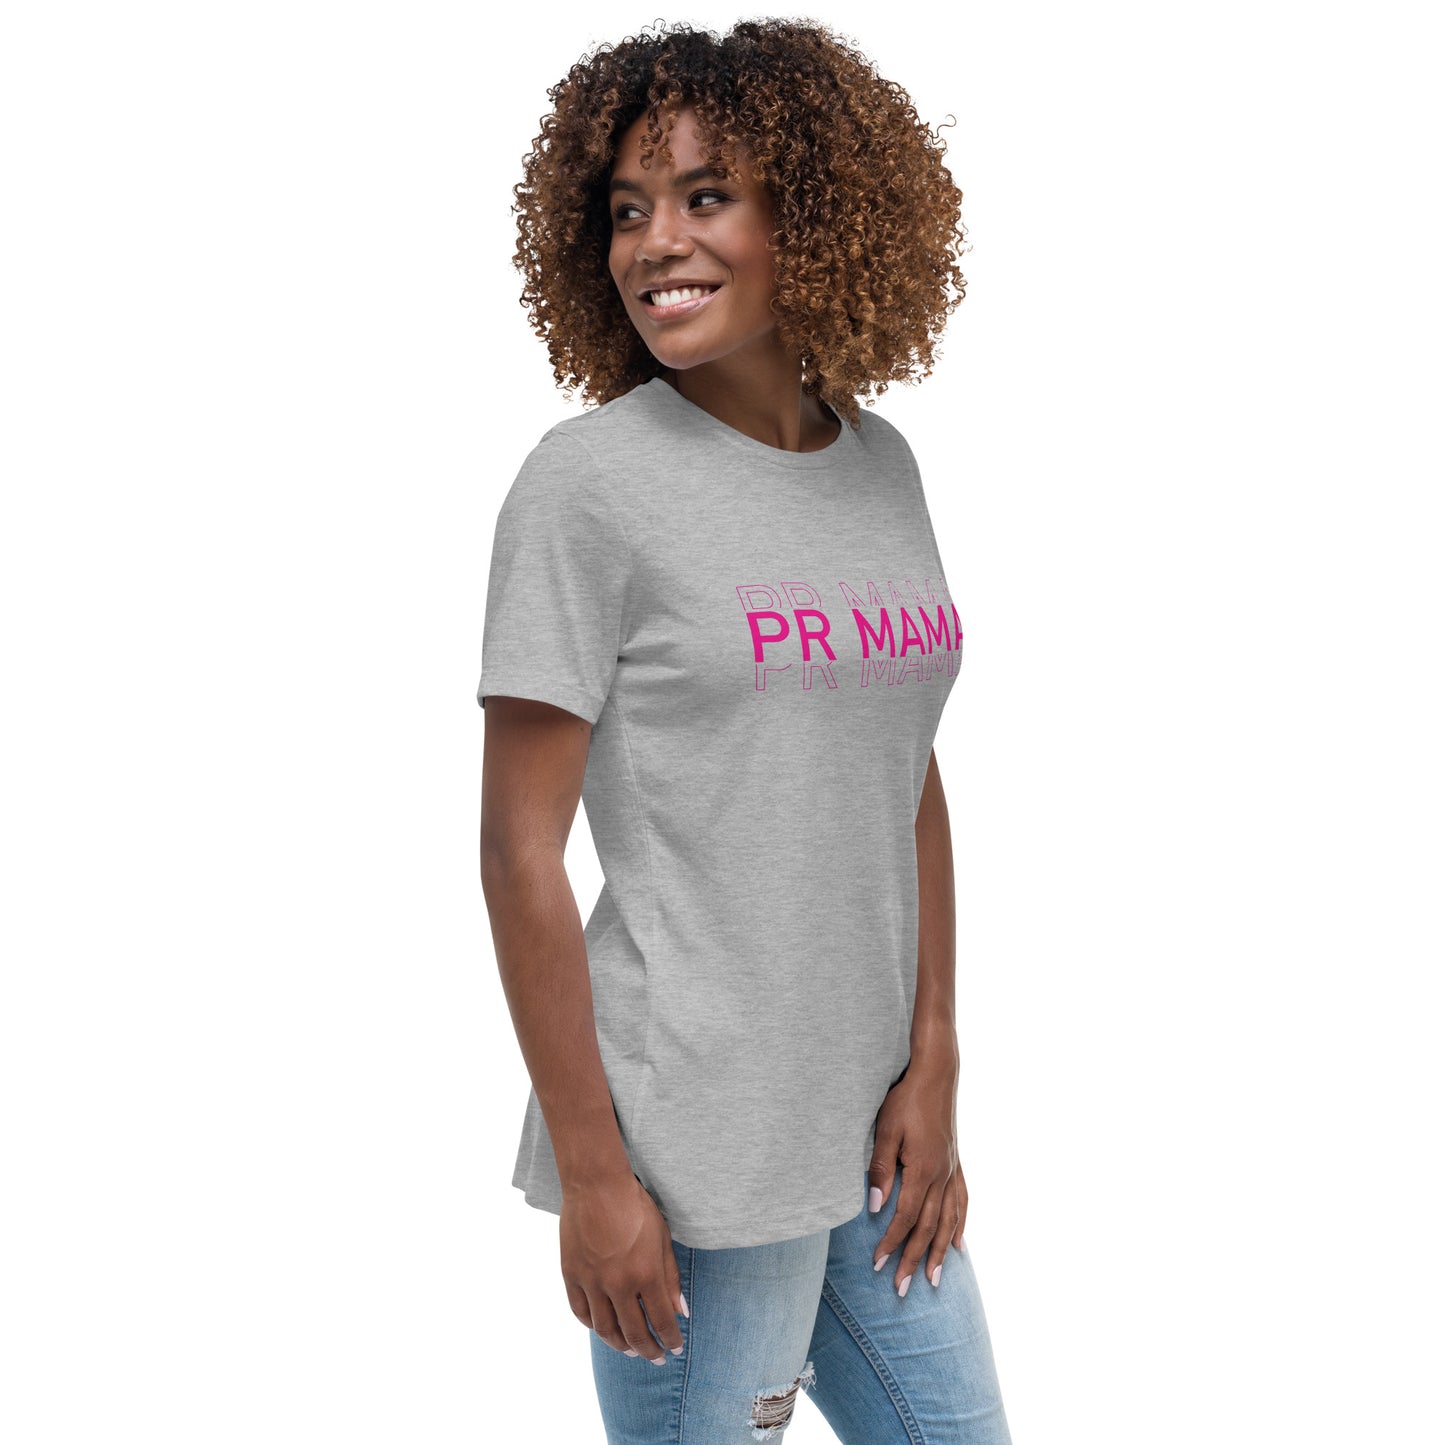 PR MAMA Printed Women's Relaxed T-Shirt